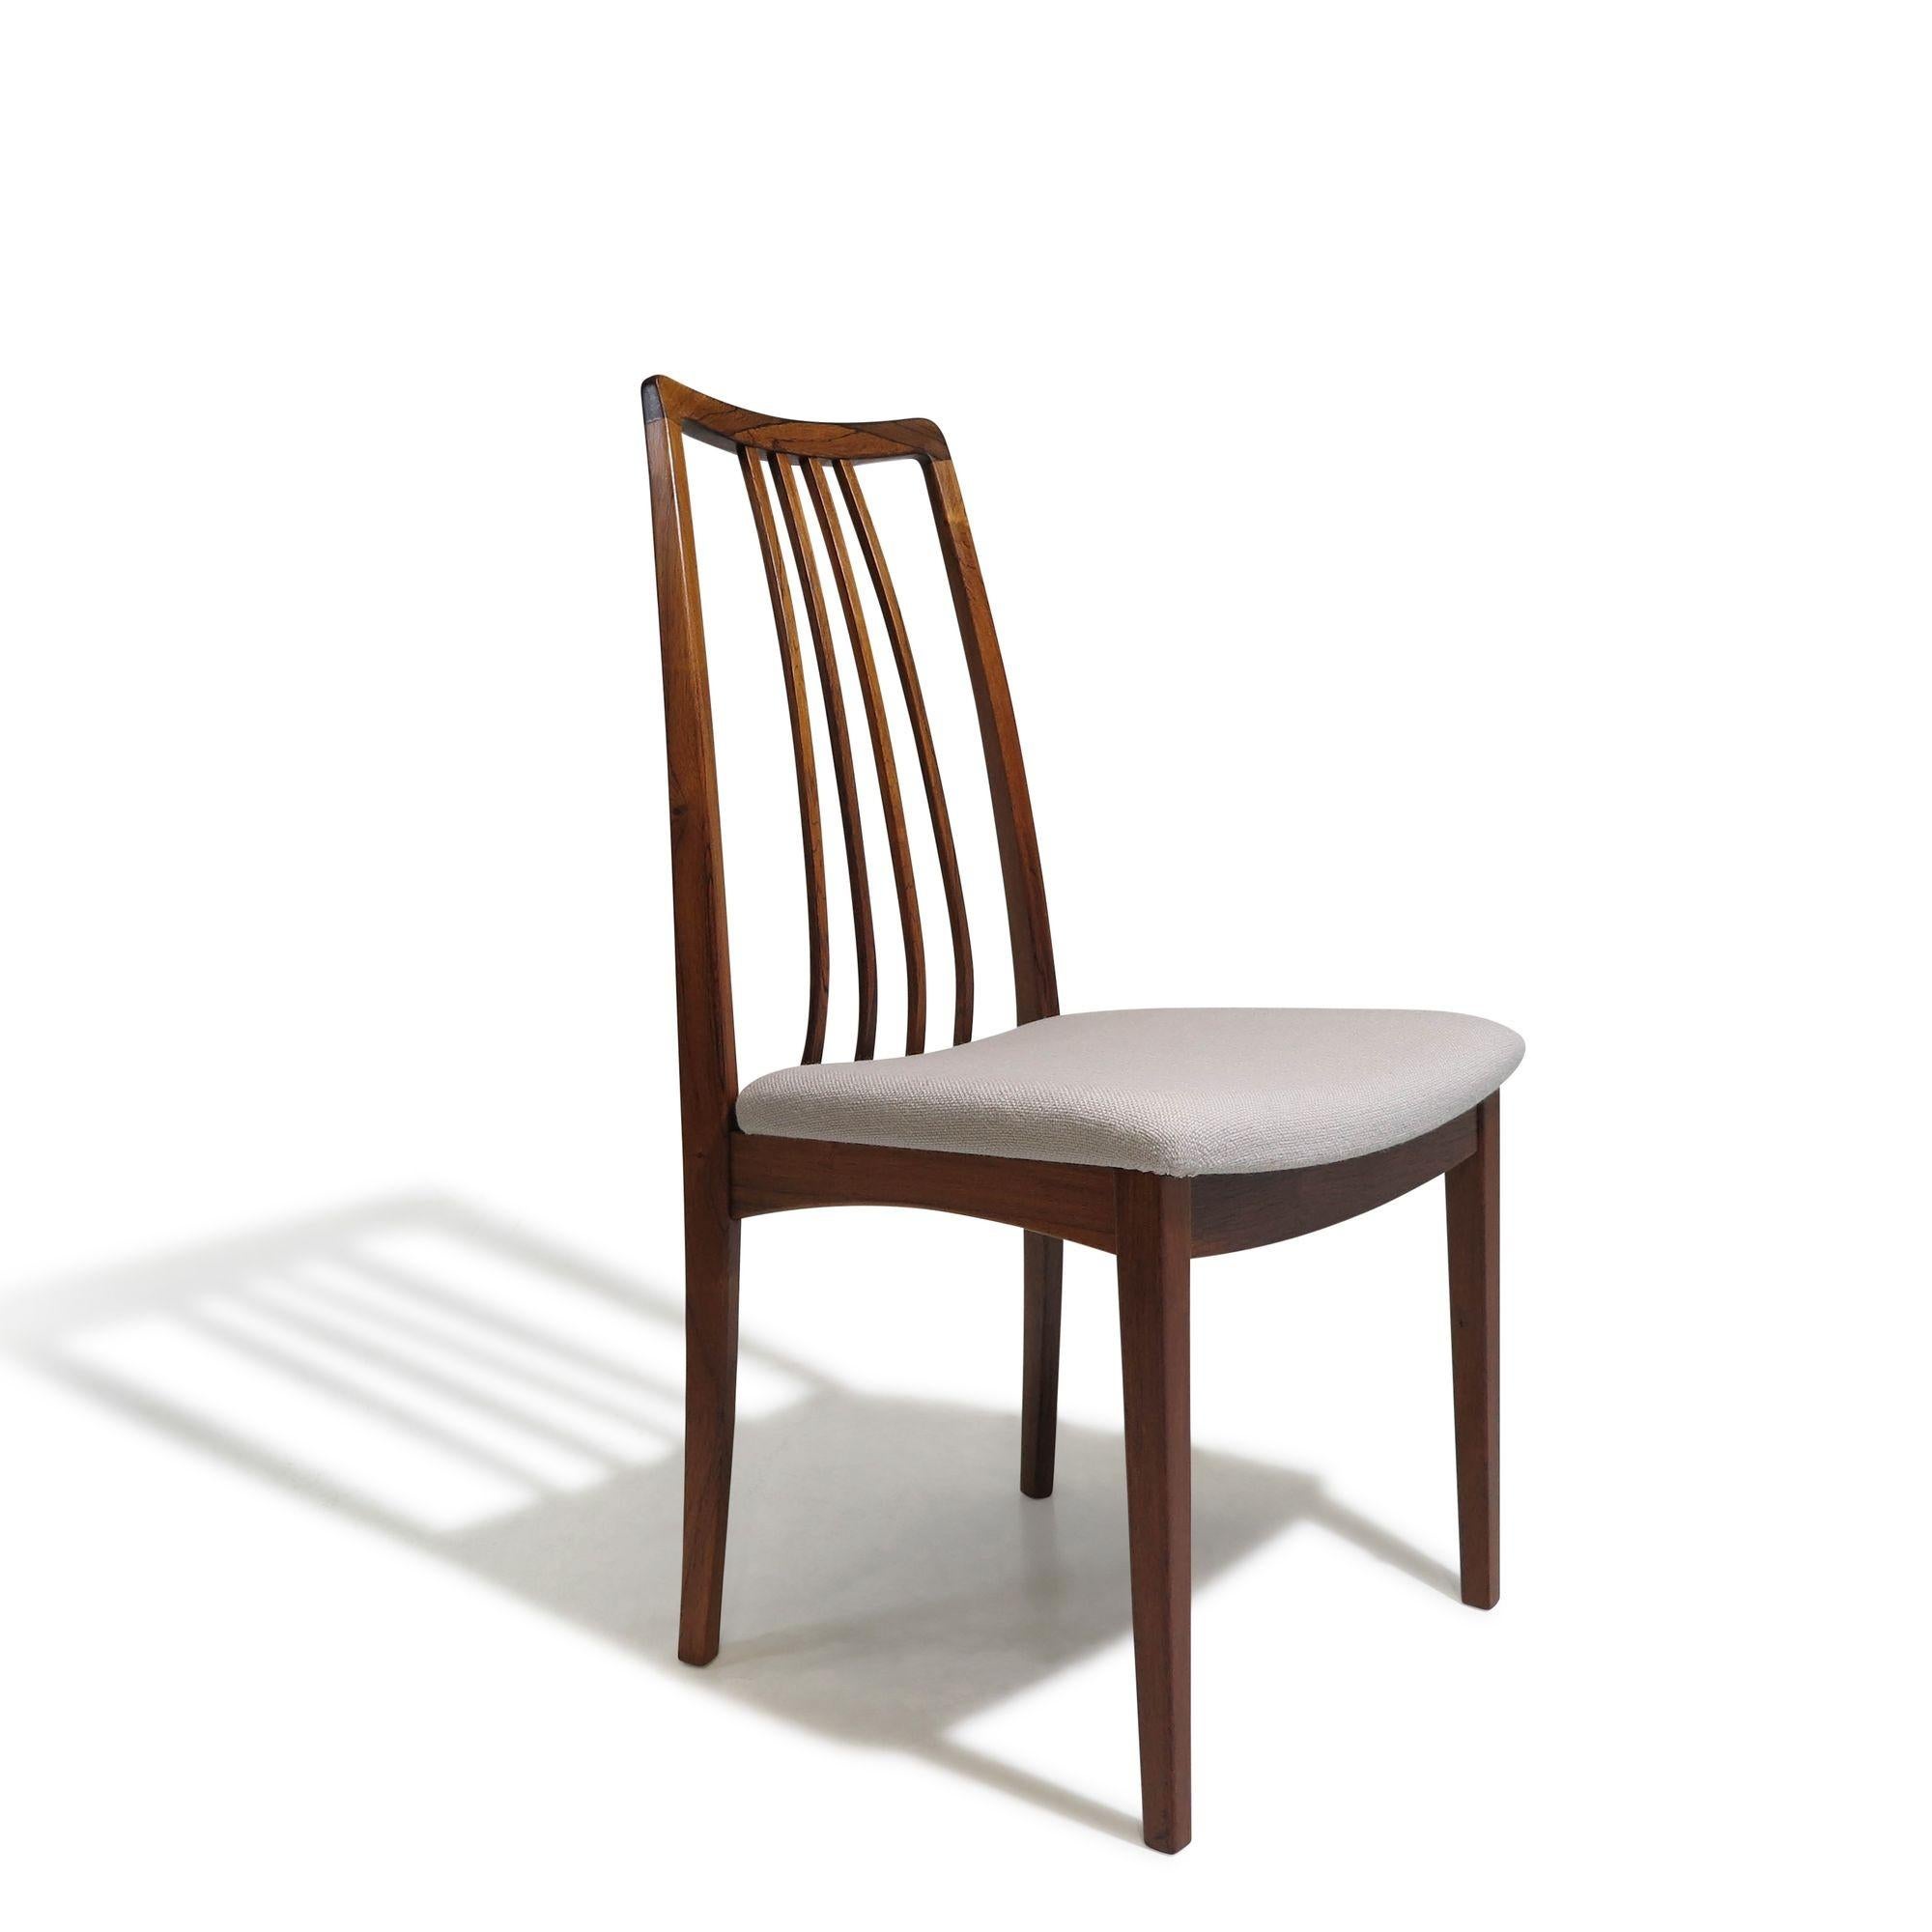 Set of 6 mid-century Brazilian Rosewood high-back dining chairs with elegant spindle backrests and newly upholstered seats in an off-white wool textile. The chairs have been fully restored and are in excellent condition, with minor signs of